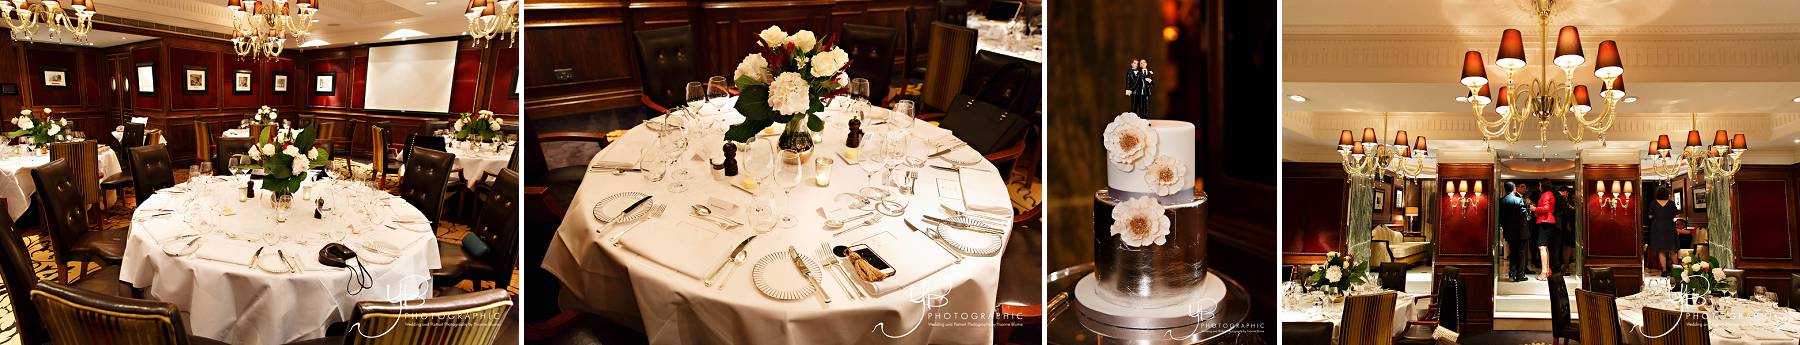 Winter wedding reception at The Goring Hotel with a white theme. The guests wore cocktail attire. 